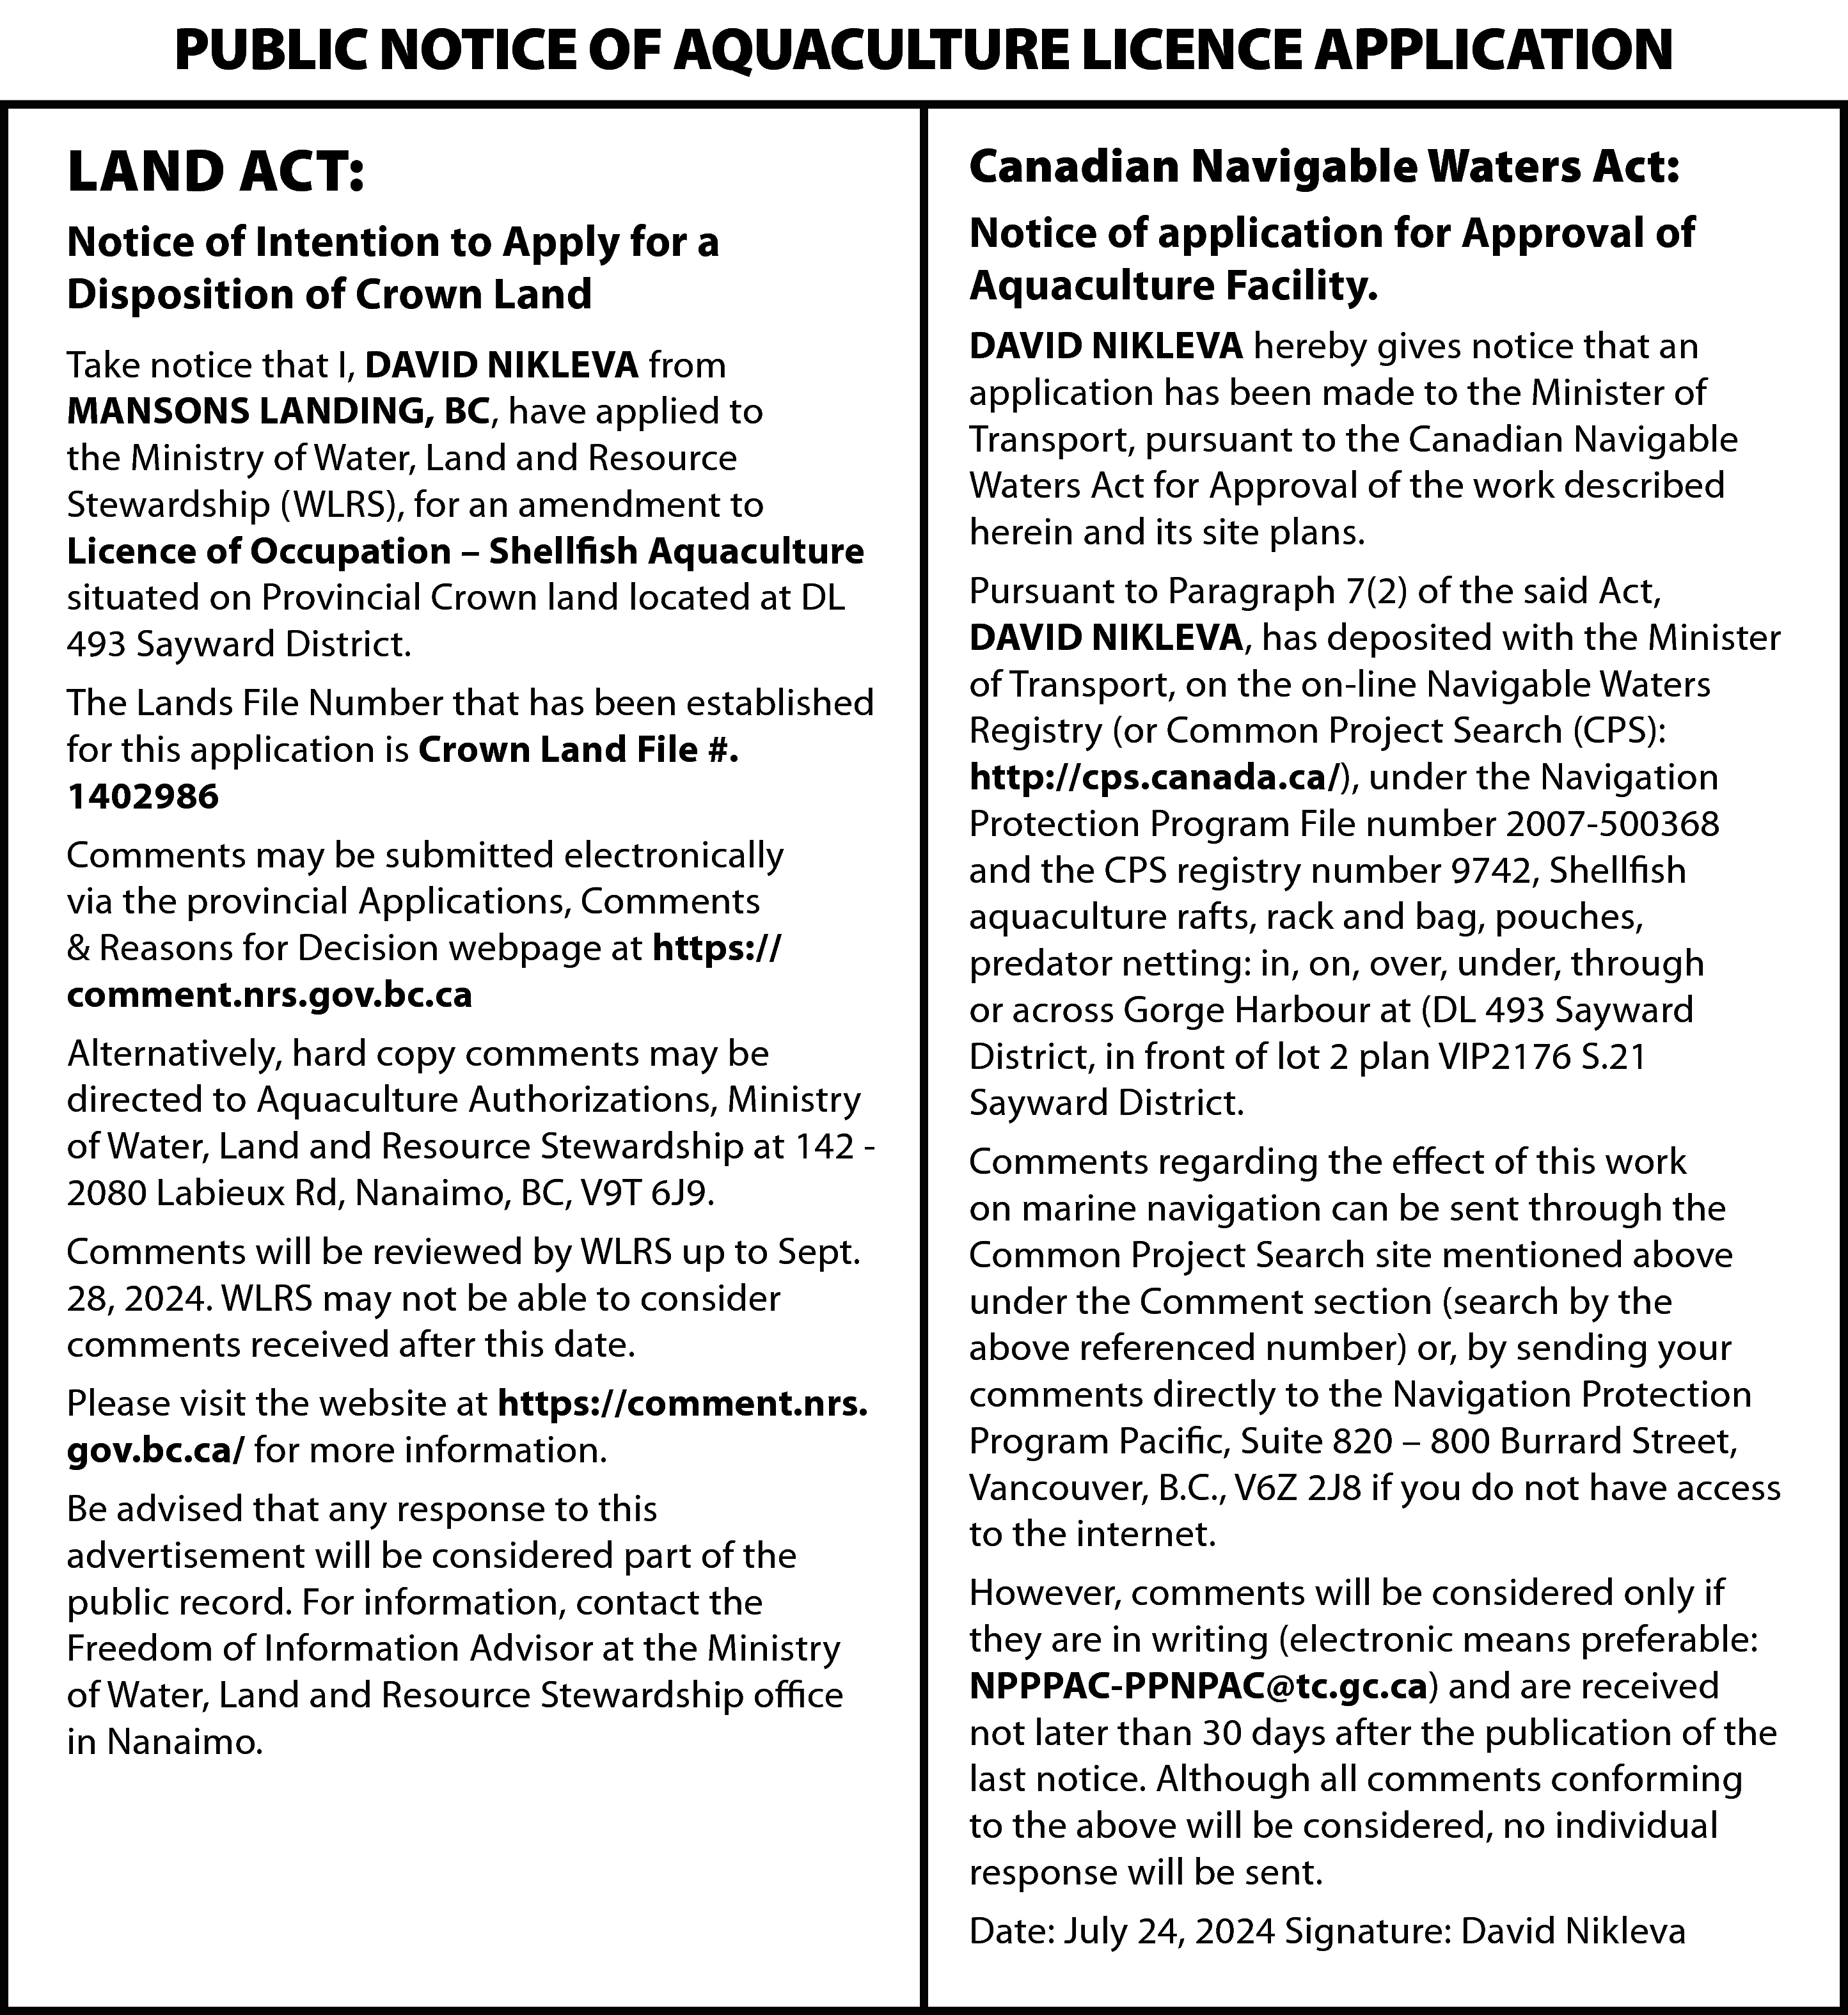 PUBLIC NOTICE OF AQUACULTURE LICENCE  PUBLIC NOTICE OF AQUACULTURE LICENCE APPLICATION  LAND ACT:    Canadian Navigable Waters Act:    Notice of Intention to Apply for a  Disposition of Crown Land    Notice of application for Approval of  Aquaculture Facility.    Take notice that I, DAVID NIKLEVA from  MANSONS LANDING, BC, have applied to  the Ministry of Water, Land and Resource  Stewardship (WLRS), for an amendment to  Licence of Occupation – Shellfish Aquaculture  situated on Provincial Crown land located at DL  493 Sayward District.    DAVID NIKLEVA hereby gives notice that an  application has been made to the Minister of  Transport, pursuant to the Canadian Navigable  Waters Act for Approval of the work described  herein and its site plans.    The Lands File Number that has been established  for this application is Crown Land File #.  1402986  Comments may be submitted electronically  via the provincial Applications, Comments  & Reasons for Decision webpage at https://  comment.nrs.gov.bc.ca  Alternatively, hard copy comments may be  directed to Aquaculture Authorizations, Ministry  of Water, Land and Resource Stewardship at 142 2080 Labieux Rd, Nanaimo, BC, V9T 6J9.  Comments will be reviewed by WLRS up to Sept.  28, 2024. WLRS may not be able to consider  comments received after this date.  Please visit the website at https://comment.nrs.  gov.bc.ca/ for more information.  Be advised that any response to this  advertisement will be considered part of the  public record. For information, contact the  Freedom of Information Advisor at the Ministry  of Water, Land and Resource Stewardship office  in Nanaimo.    Pursuant to Paragraph 7(2) of the said Act,  DAVID NIKLEVA, has deposited with the Minister  of Transport, on the on-line Navigable Waters  Registry (or Common Project Search (CPS):  http://cps.canada.ca/), under the Navigation  Protection Program File number 2007-500368  and the CPS registry number 9742, Shellfish  aquaculture rafts, rack and bag, pouches,  predator netting: in, on, over, under, through  or across Gorge Harbour at (DL 493 Sayward  District, in front of lot 2 plan VIP2176 S.21  Sayward District.  Comments regarding the effect of this work  on marine navigation can be sent through the  Common Project Search site mentioned above  under the Comment section (search by the  above referenced number) or, by sending your  comments directly to the Navigation Protection  Program Pacific, Suite 820 – 800 Burrard Street,  Vancouver, B.C., V6Z 2J8 if you do not have access  to the internet.  However, comments will be considered only if  they are in writing (electronic means preferable:  NPPPAC-PPNPAC@tc.gc.ca) and are received  not later than 30 days after the publication of the  last notice. Although all comments conforming  to the above will be considered, no individual  response will be sent.  Date: July 24, 2024 Signature: David Nikleva    